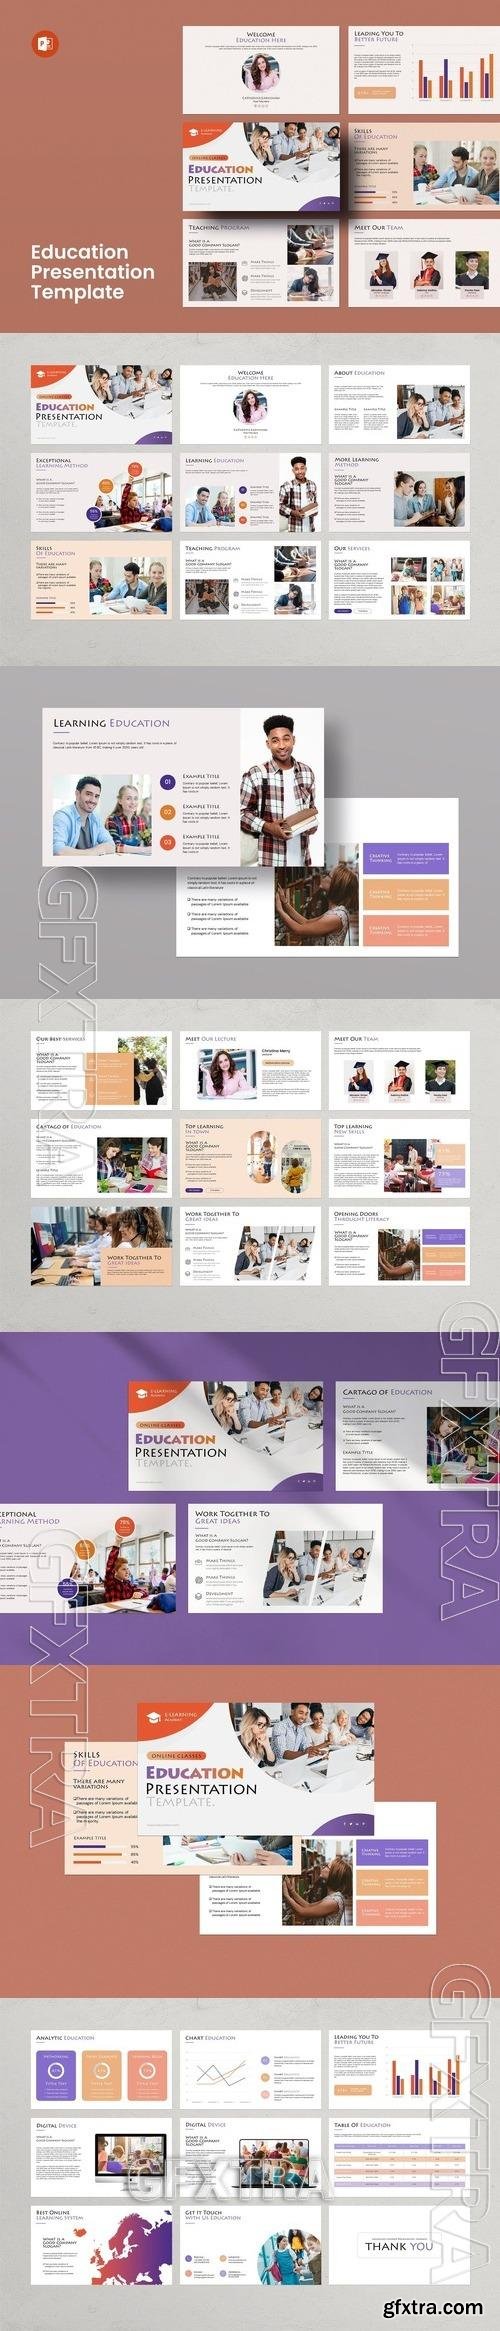 Education - PowerPoint Template RAUSUWD